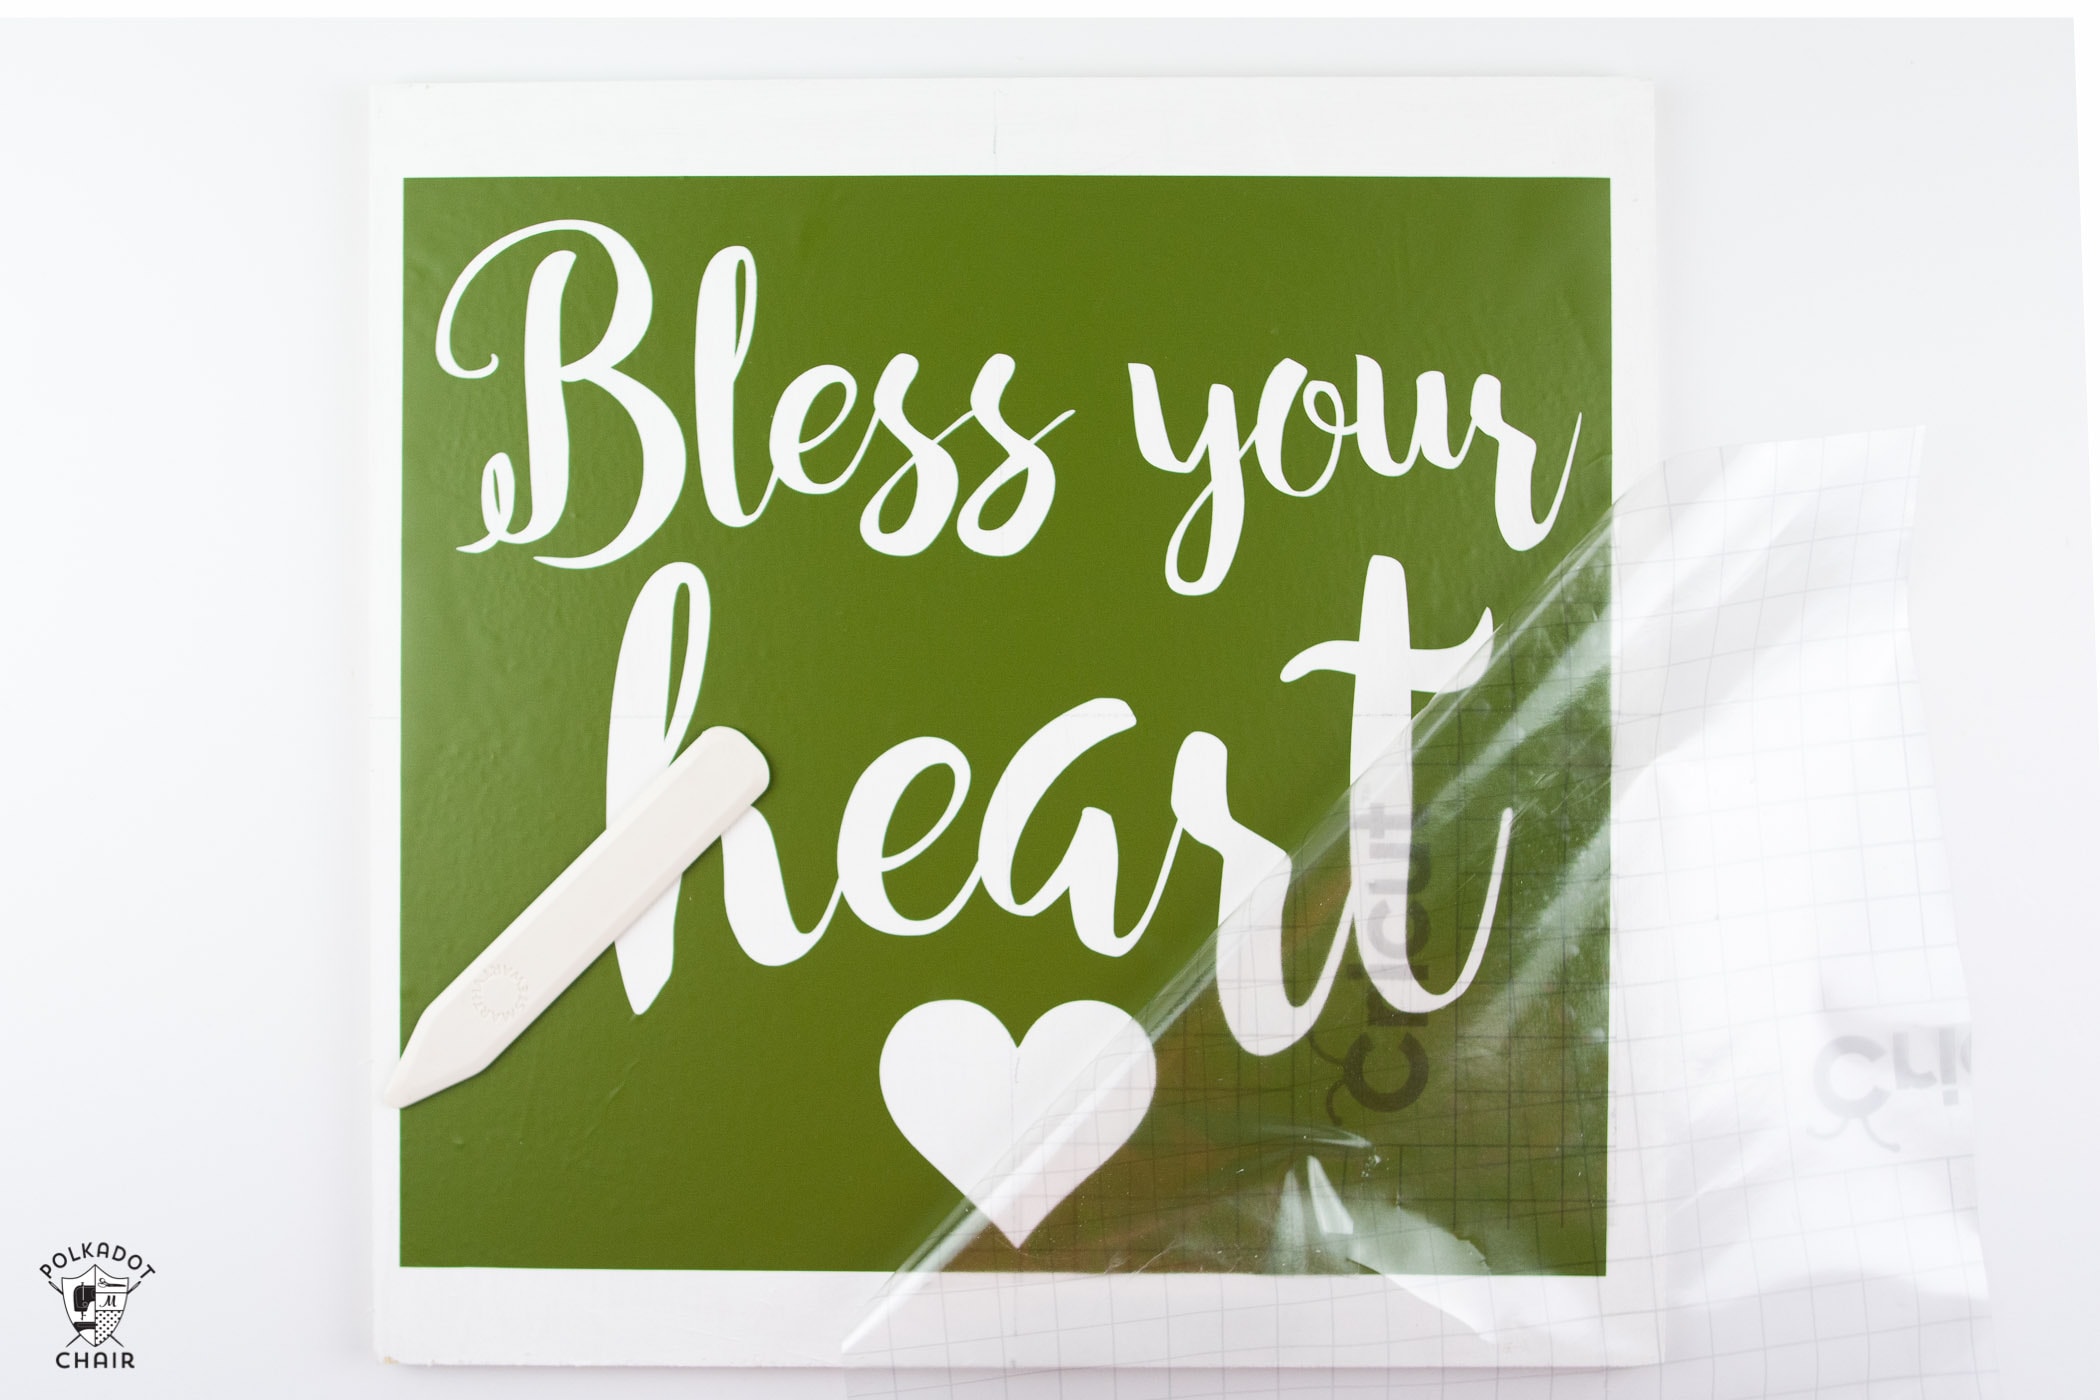 How to make a hand painted wood sign- This "Bless your Heart" sign is such a cute craft idea for Valentine's Day or for everyday!